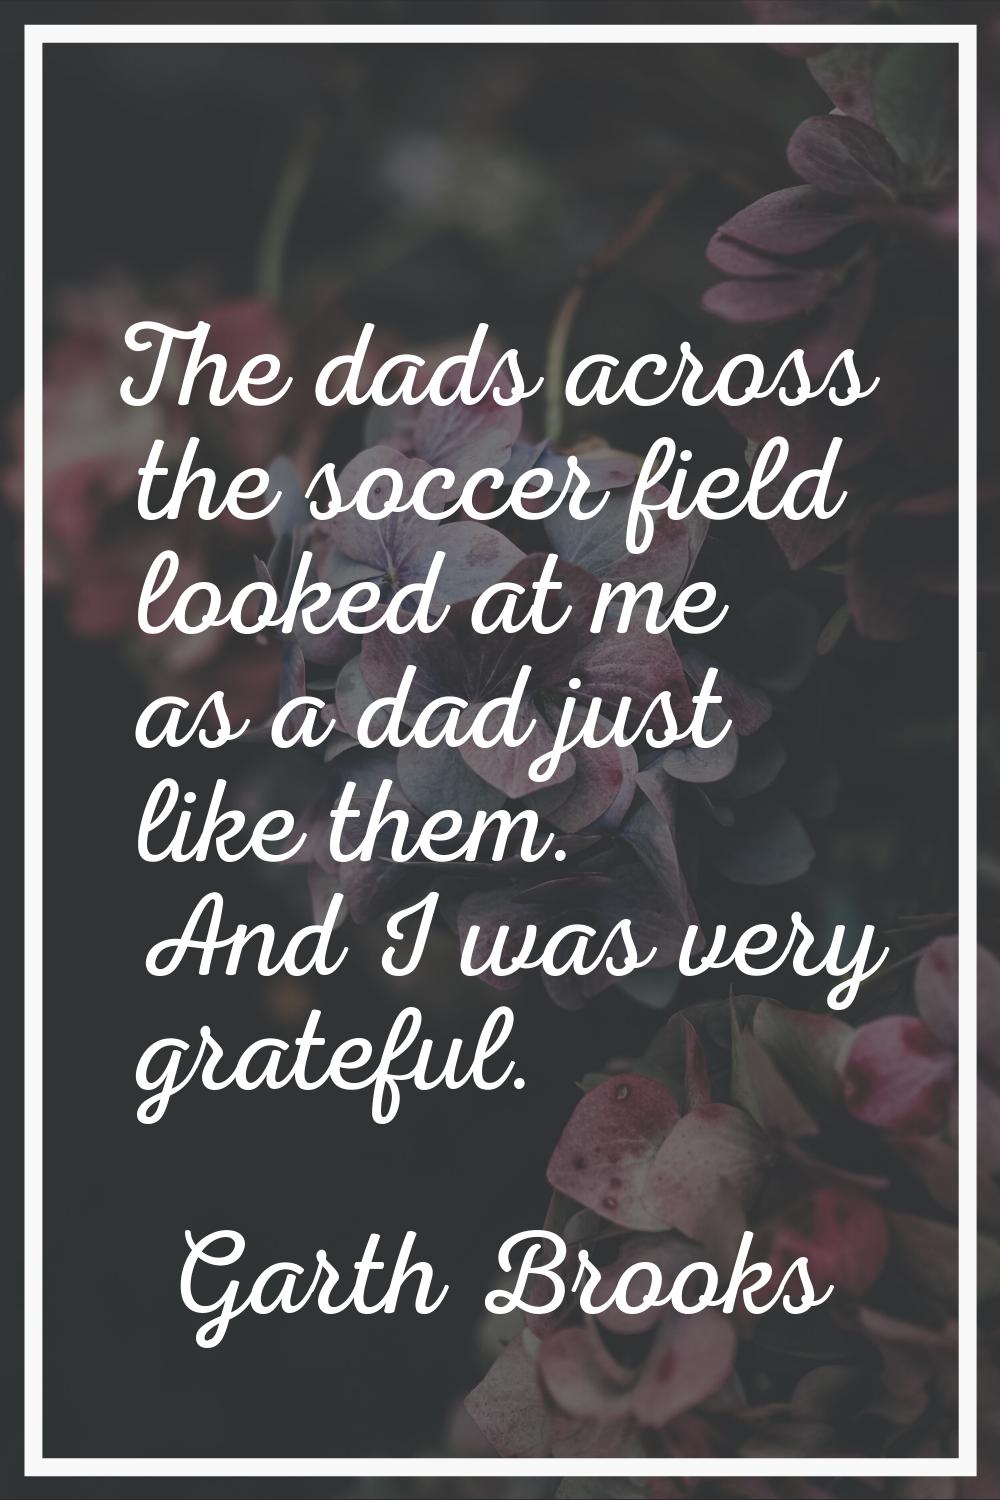 The dads across the soccer field looked at me as a dad just like them. And I was very grateful.